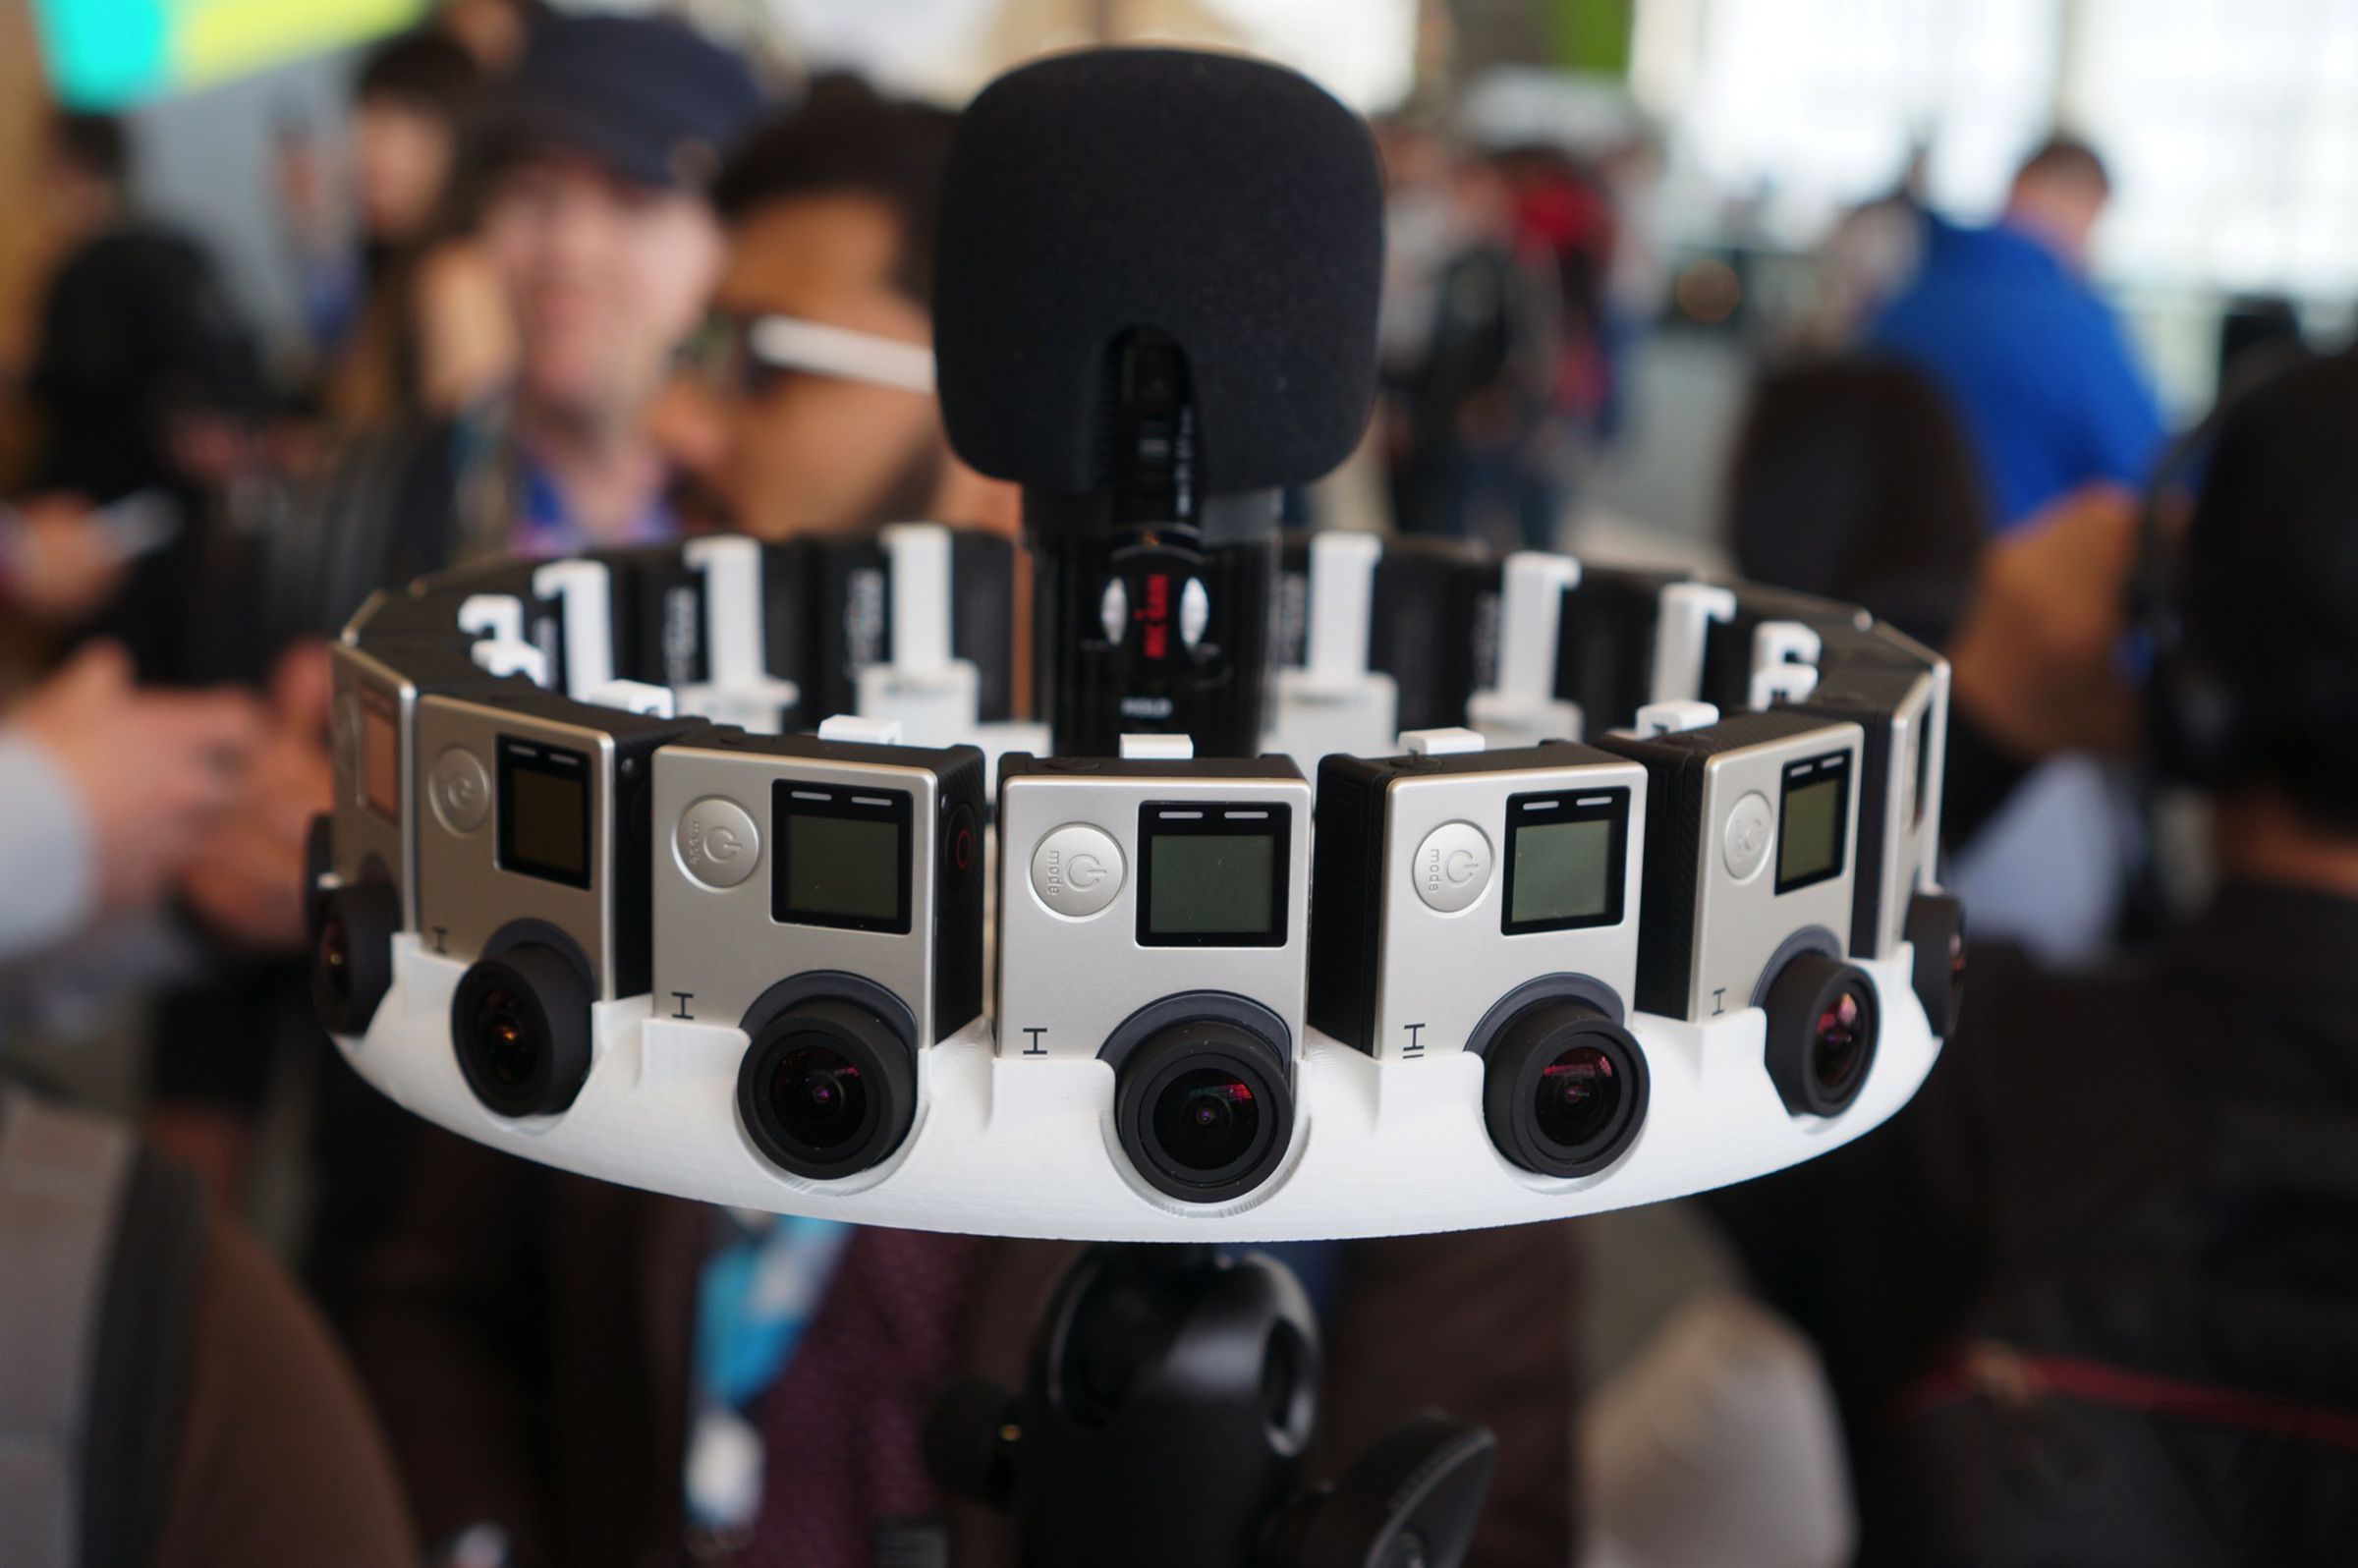 Hands on with the GoPro Jump VR camara rig